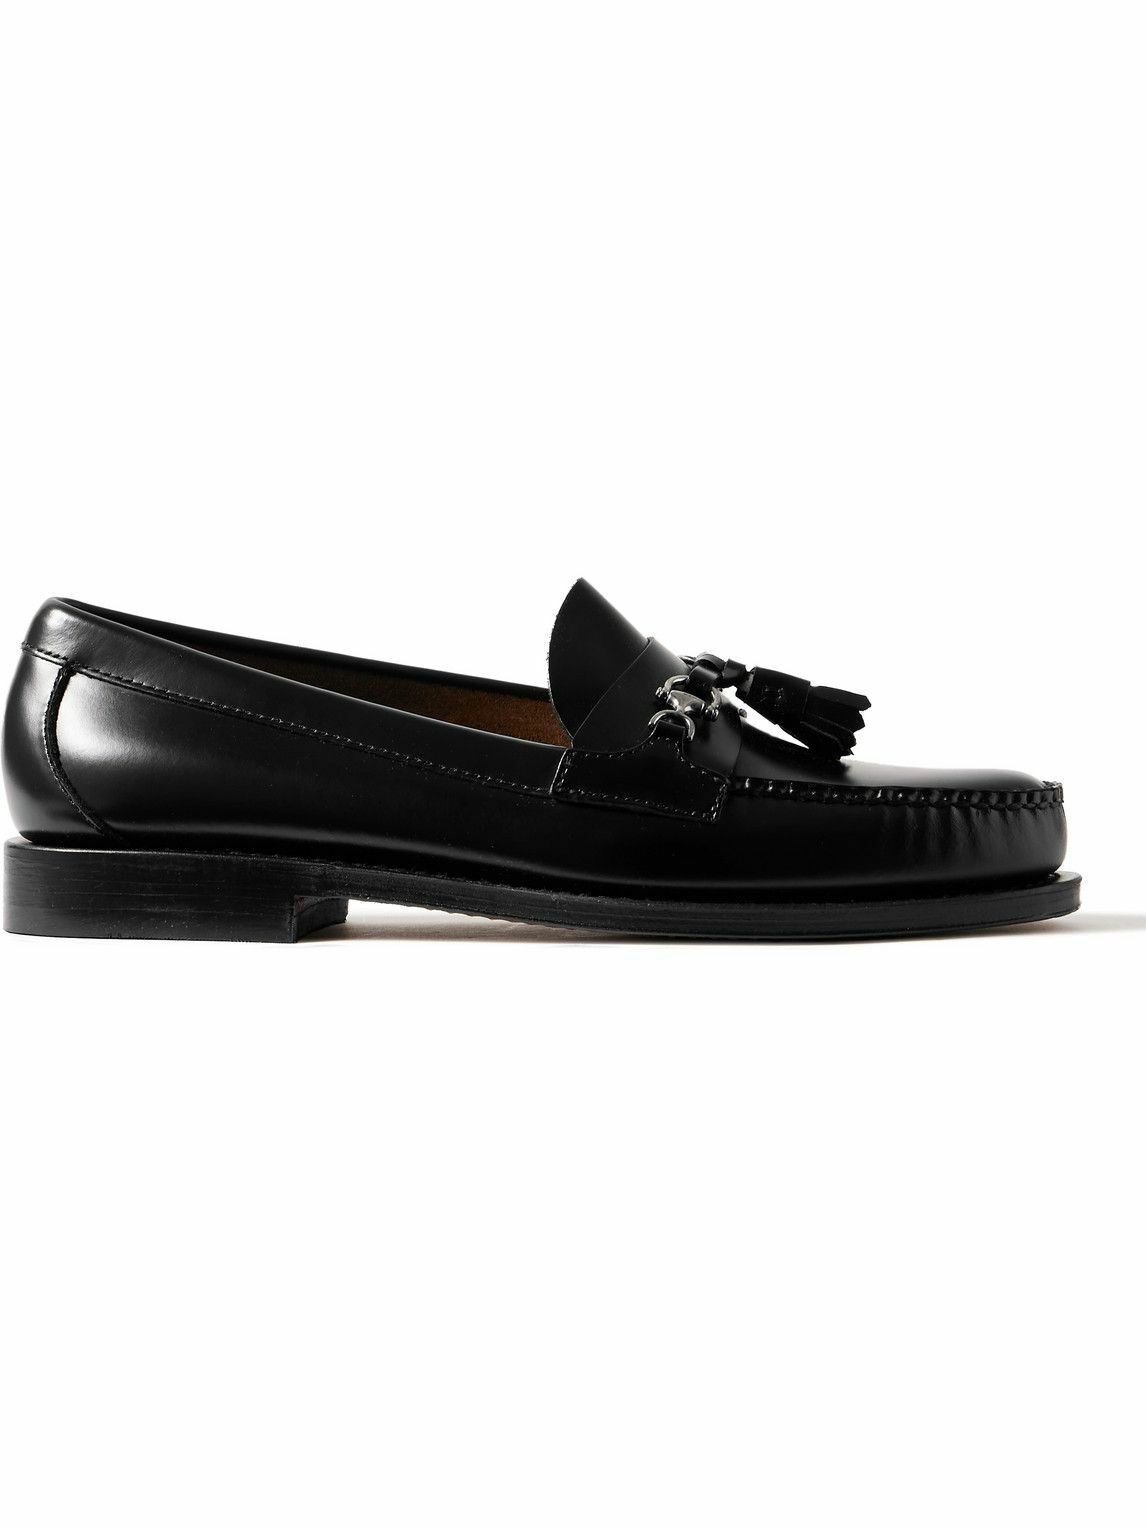 Photo: G.H. Bass & Co. - Weejuns Heritage Lincoln Embellished Tasselled Leather Loafers - Black